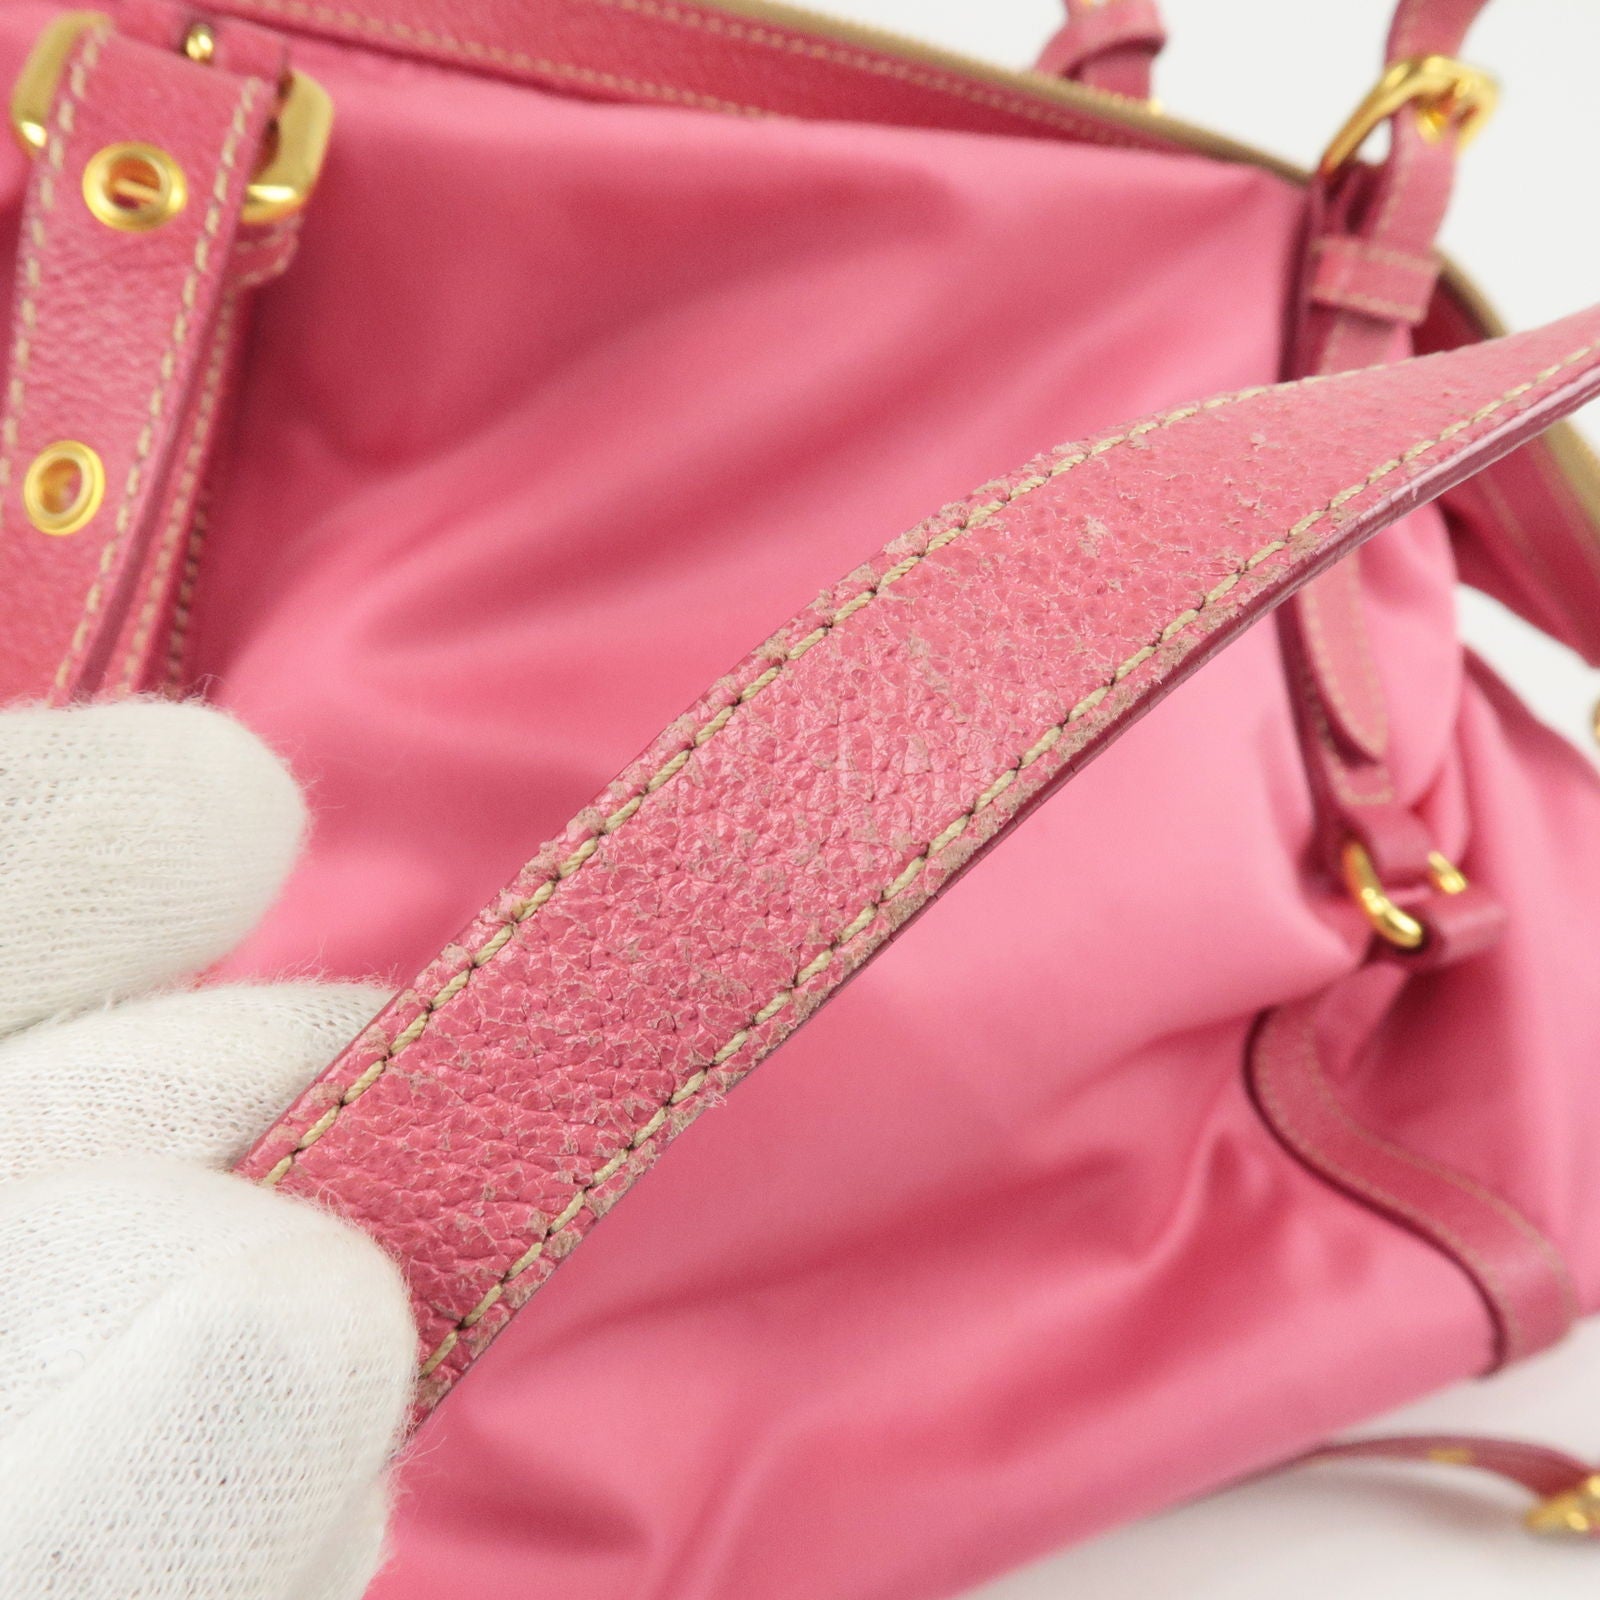 Showing off two pink Prada nylon bags available for sale in my